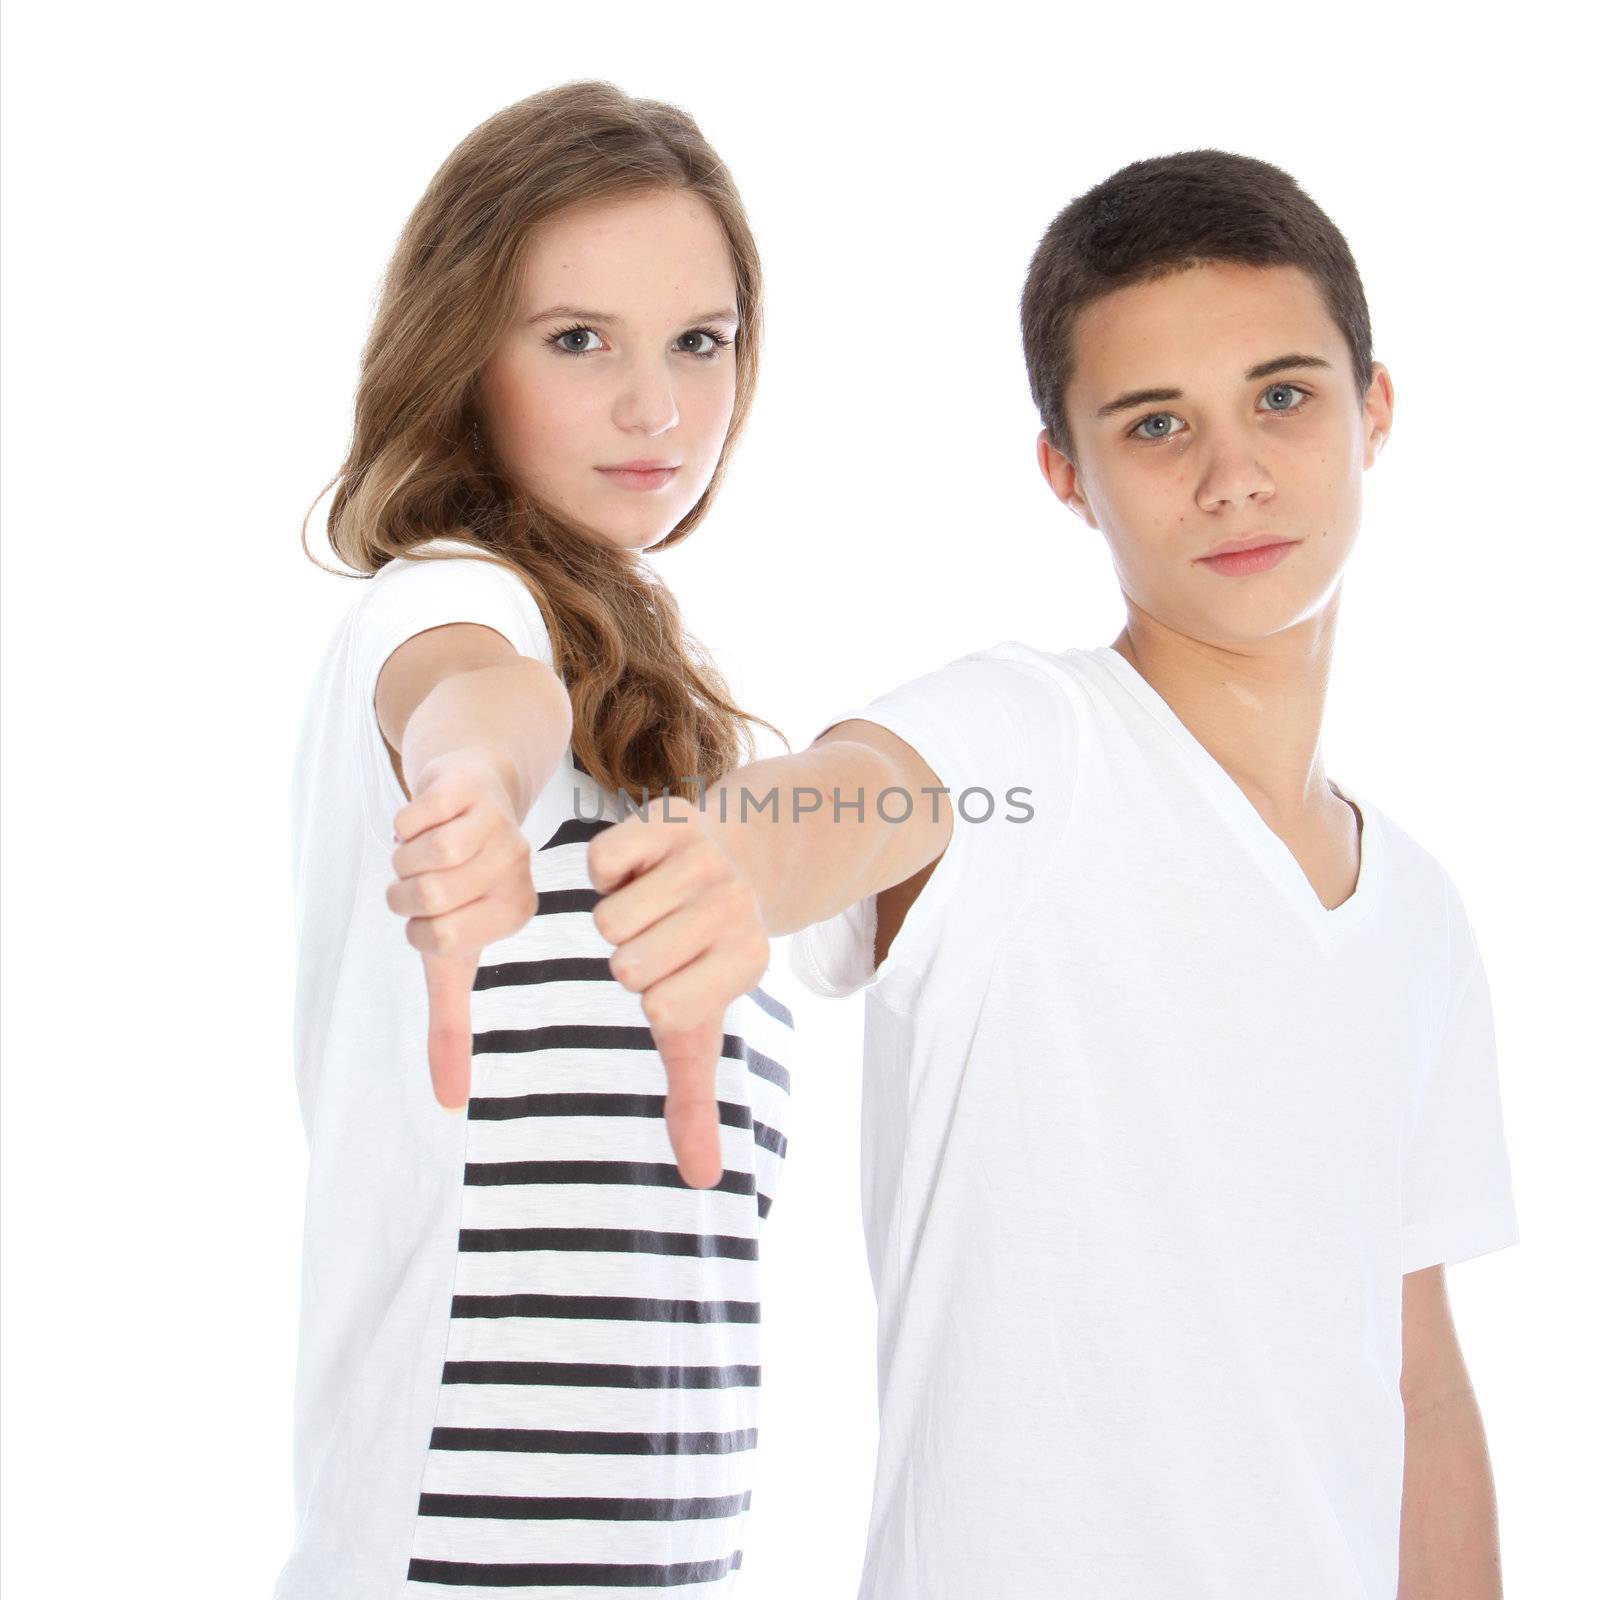 Unimpressed teenagers giving a thumbs down gesture of condemnation and refusal isolated on white